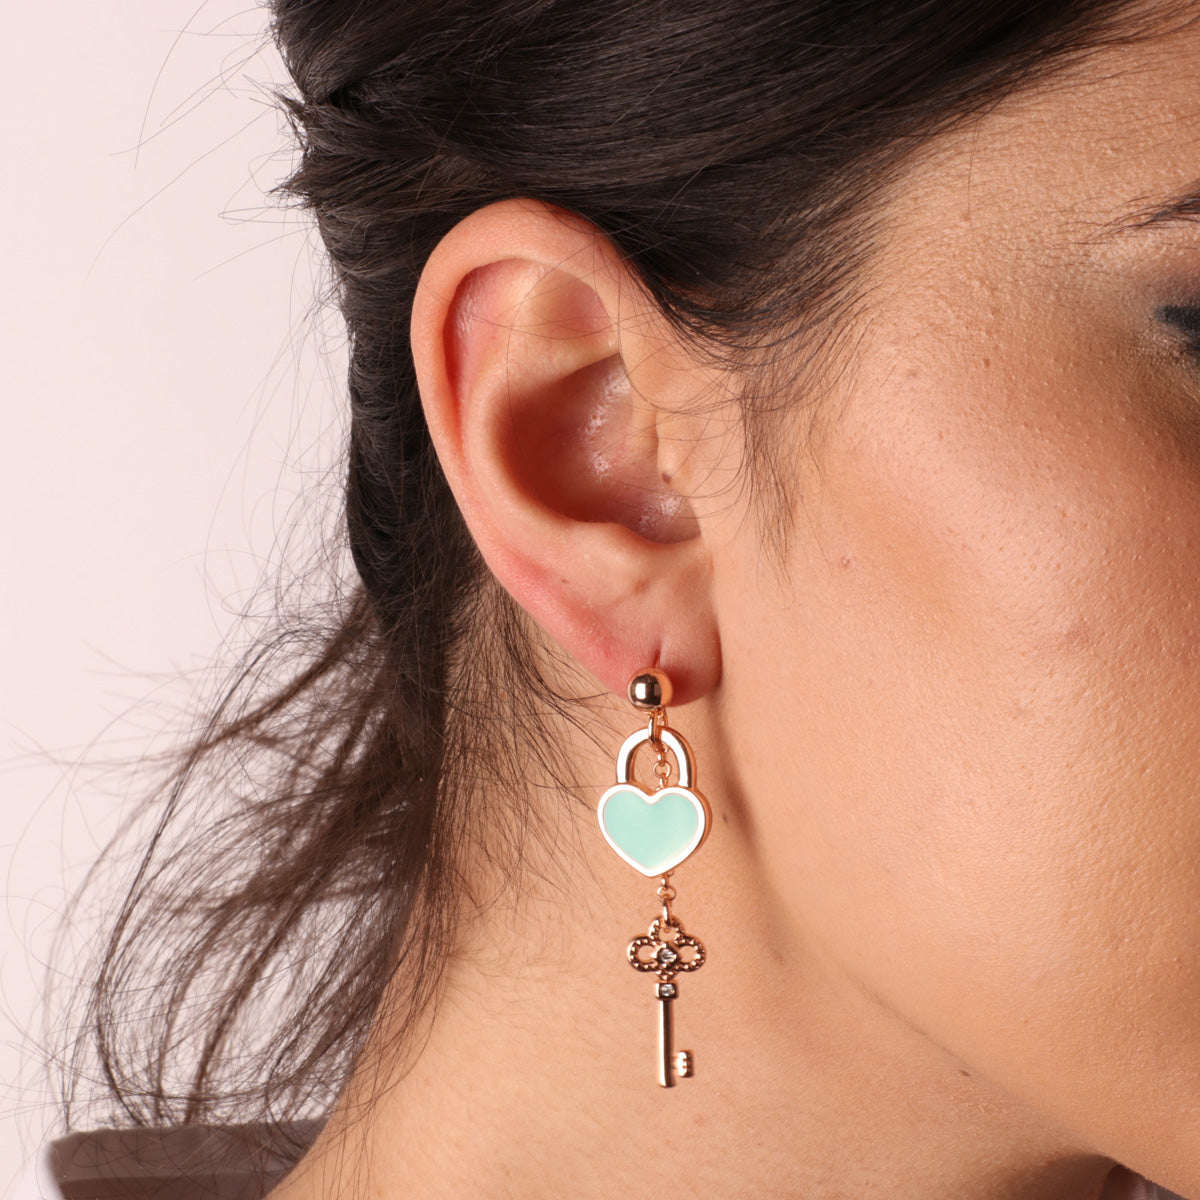 Metal earrings with heart and key padlock with turquoise nail polish and white crystals